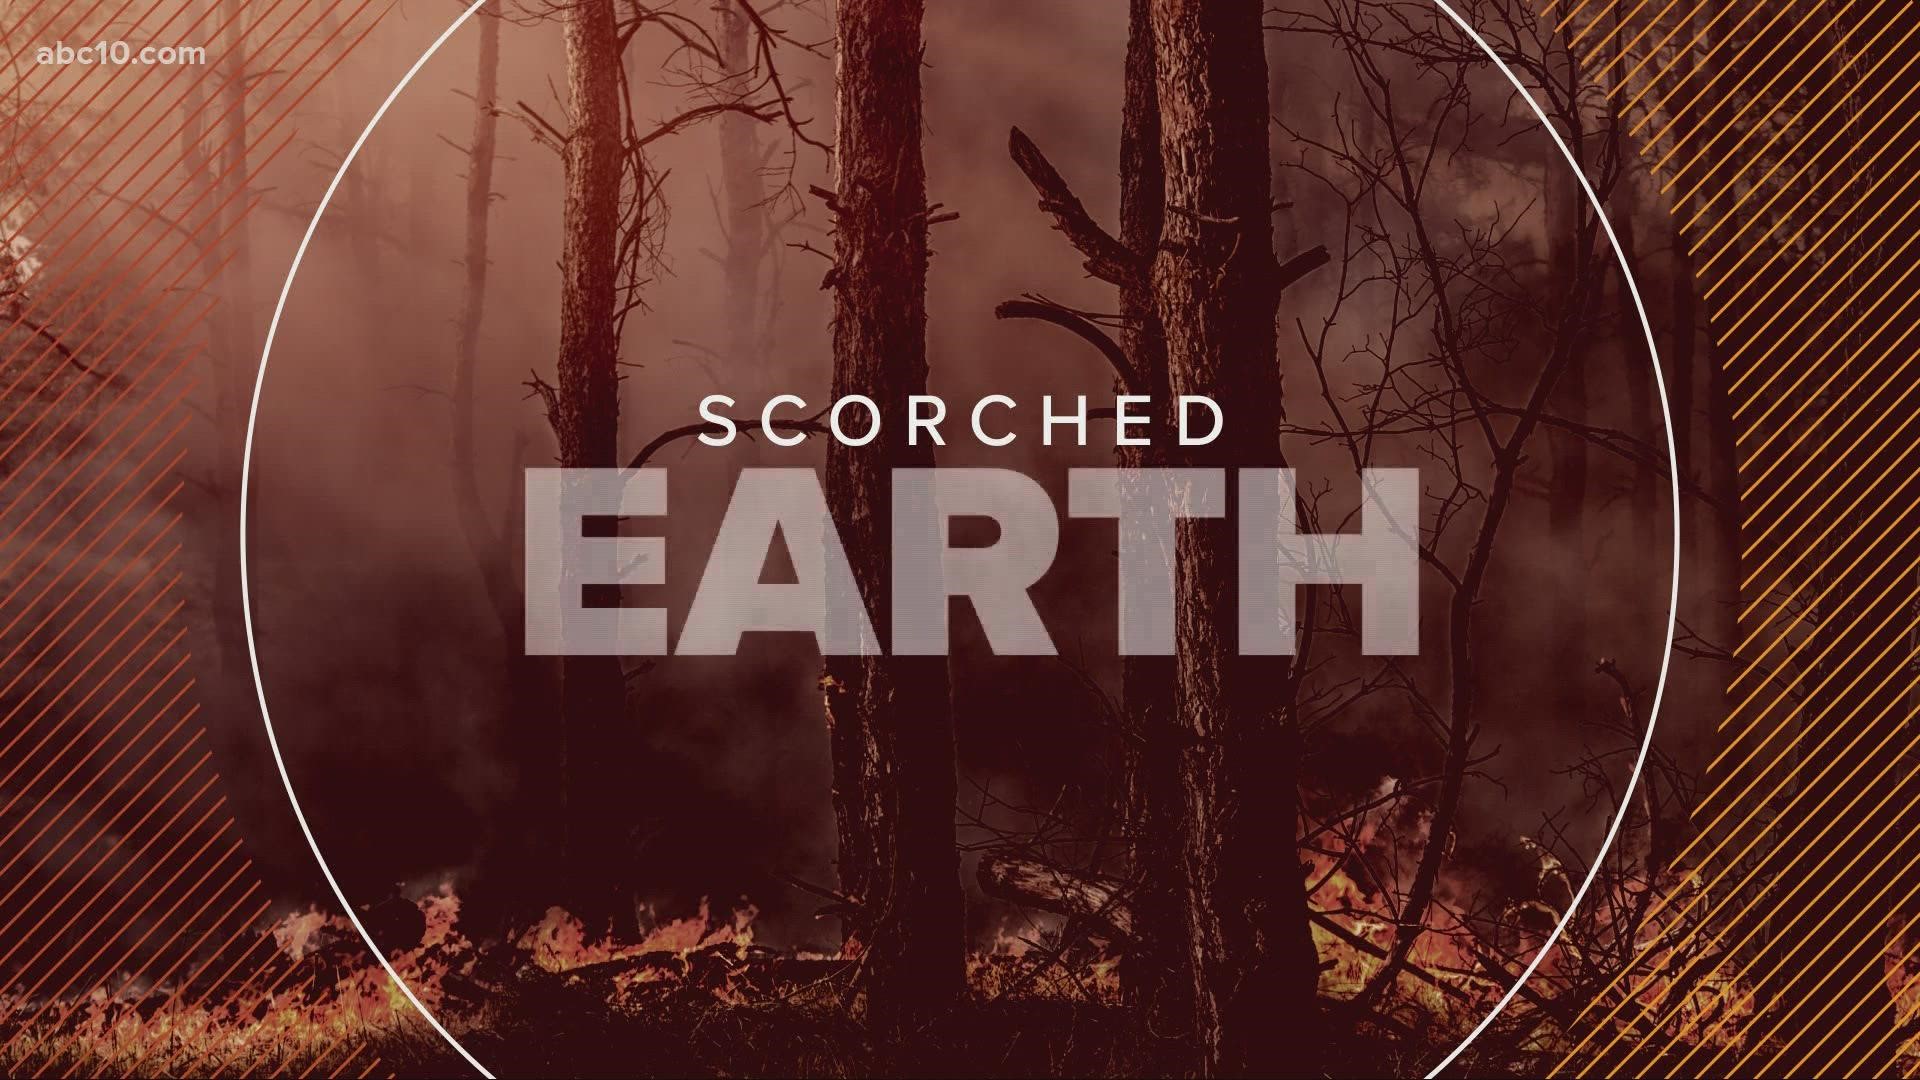 ABC10's Scorched Earth team gives you tips on how to help with drought and water conservation.